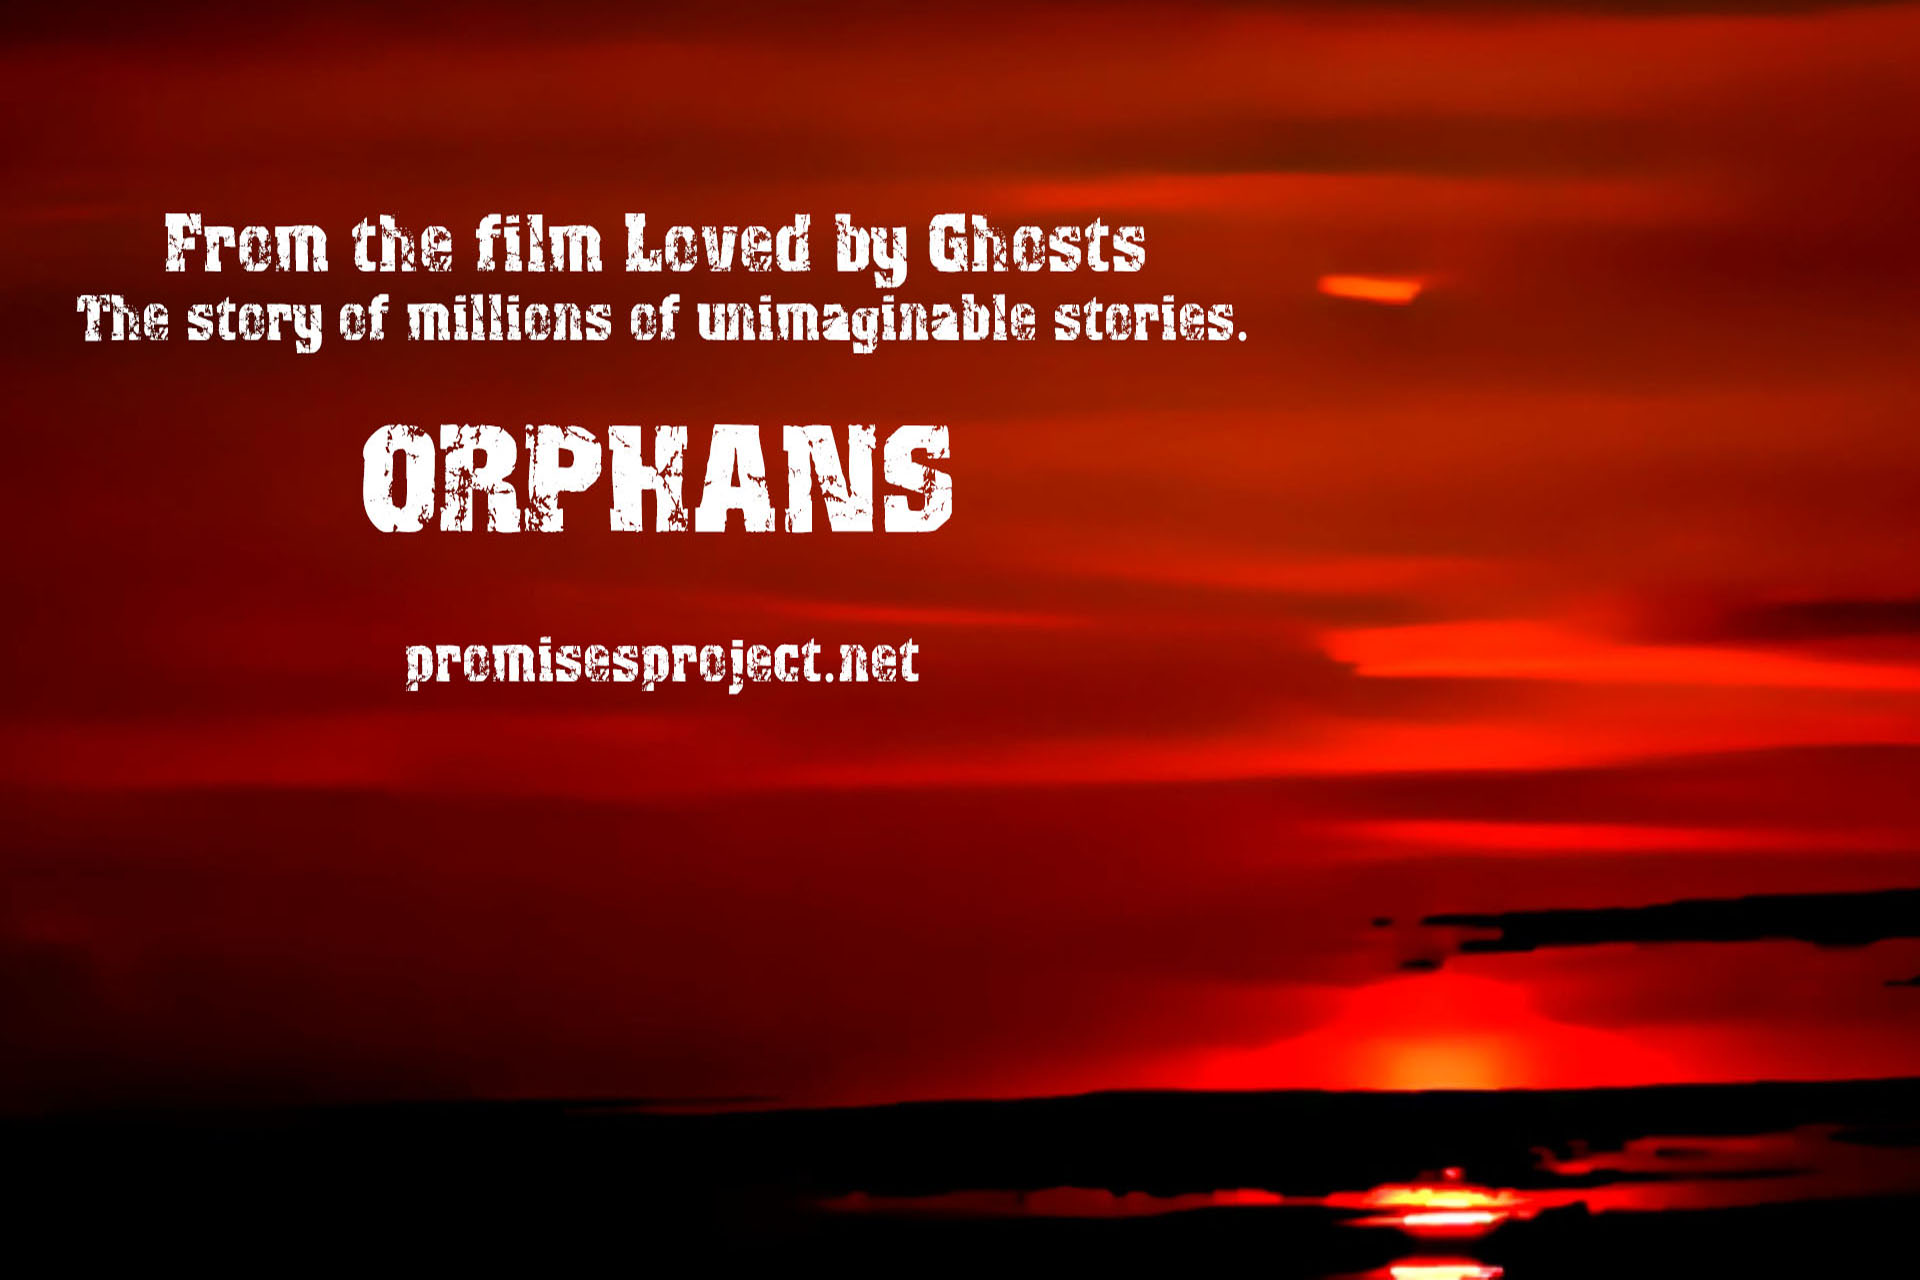 Orphans - from the film 'Loved by Ghosts'